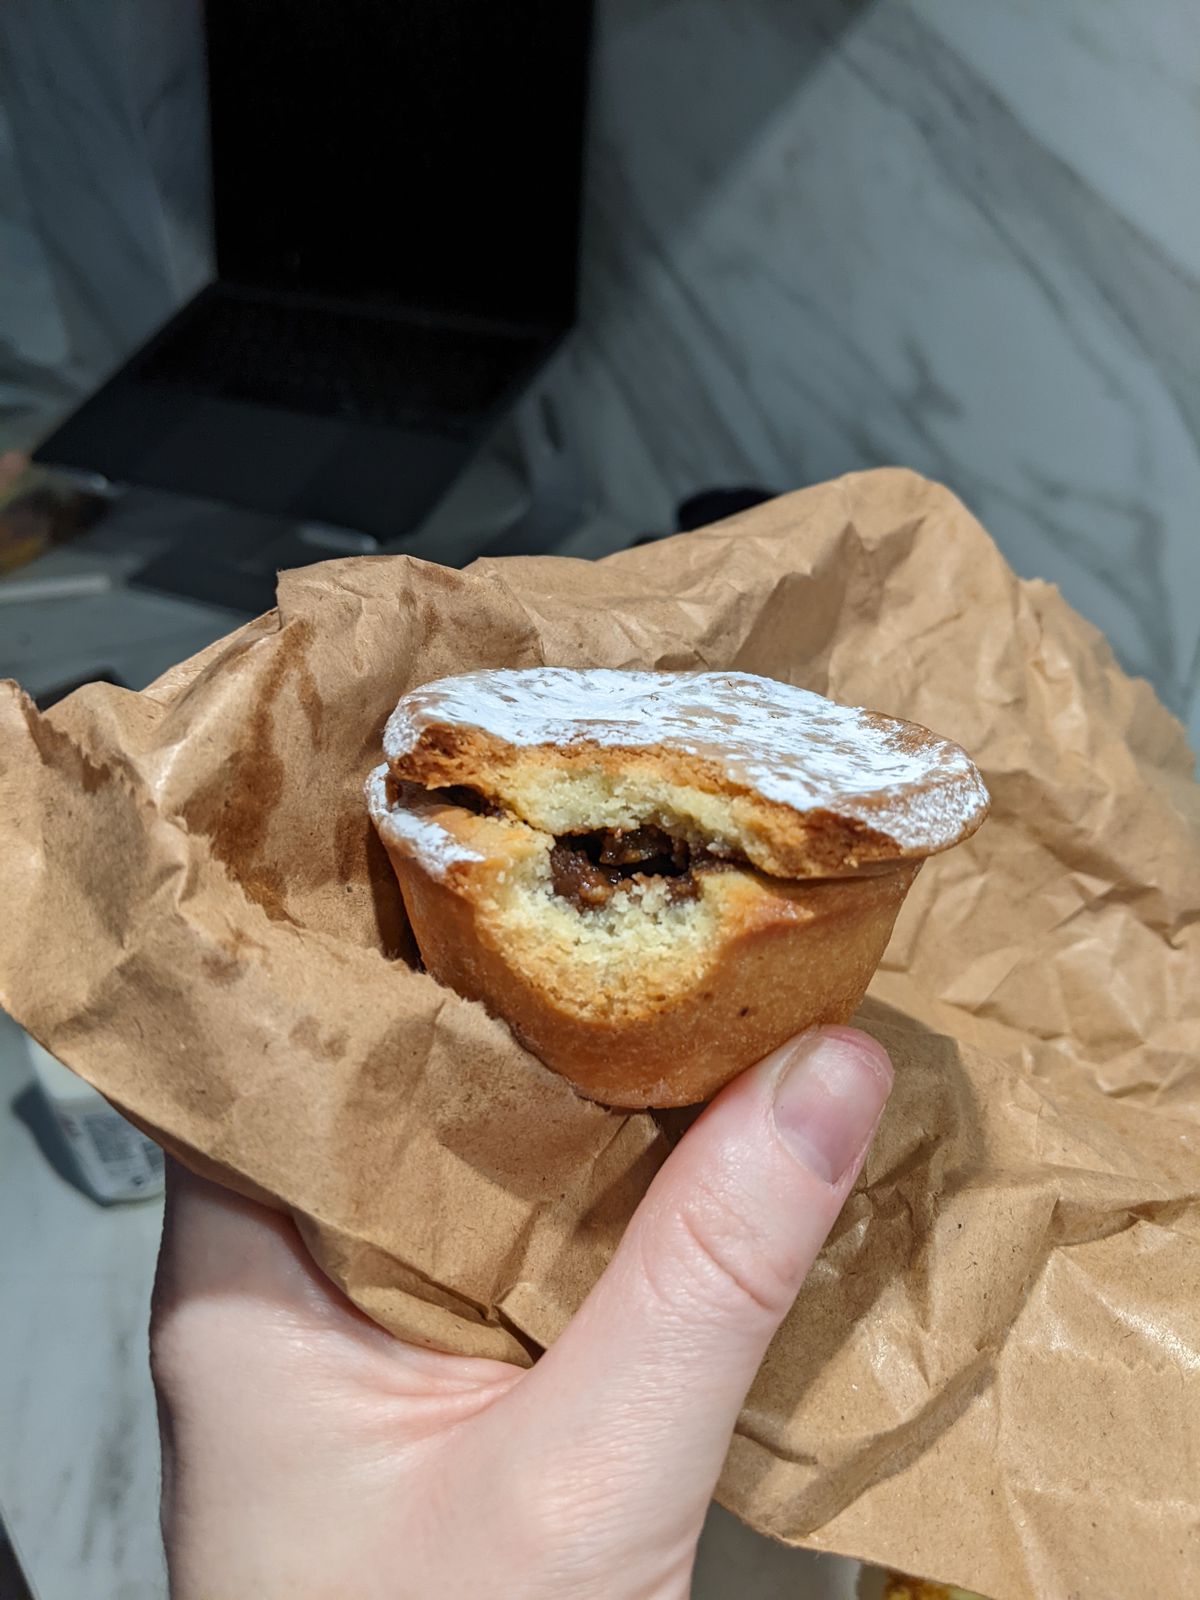 A hand holding a bitten-into mince pie, the filling visible, on top of a brown paper bag.